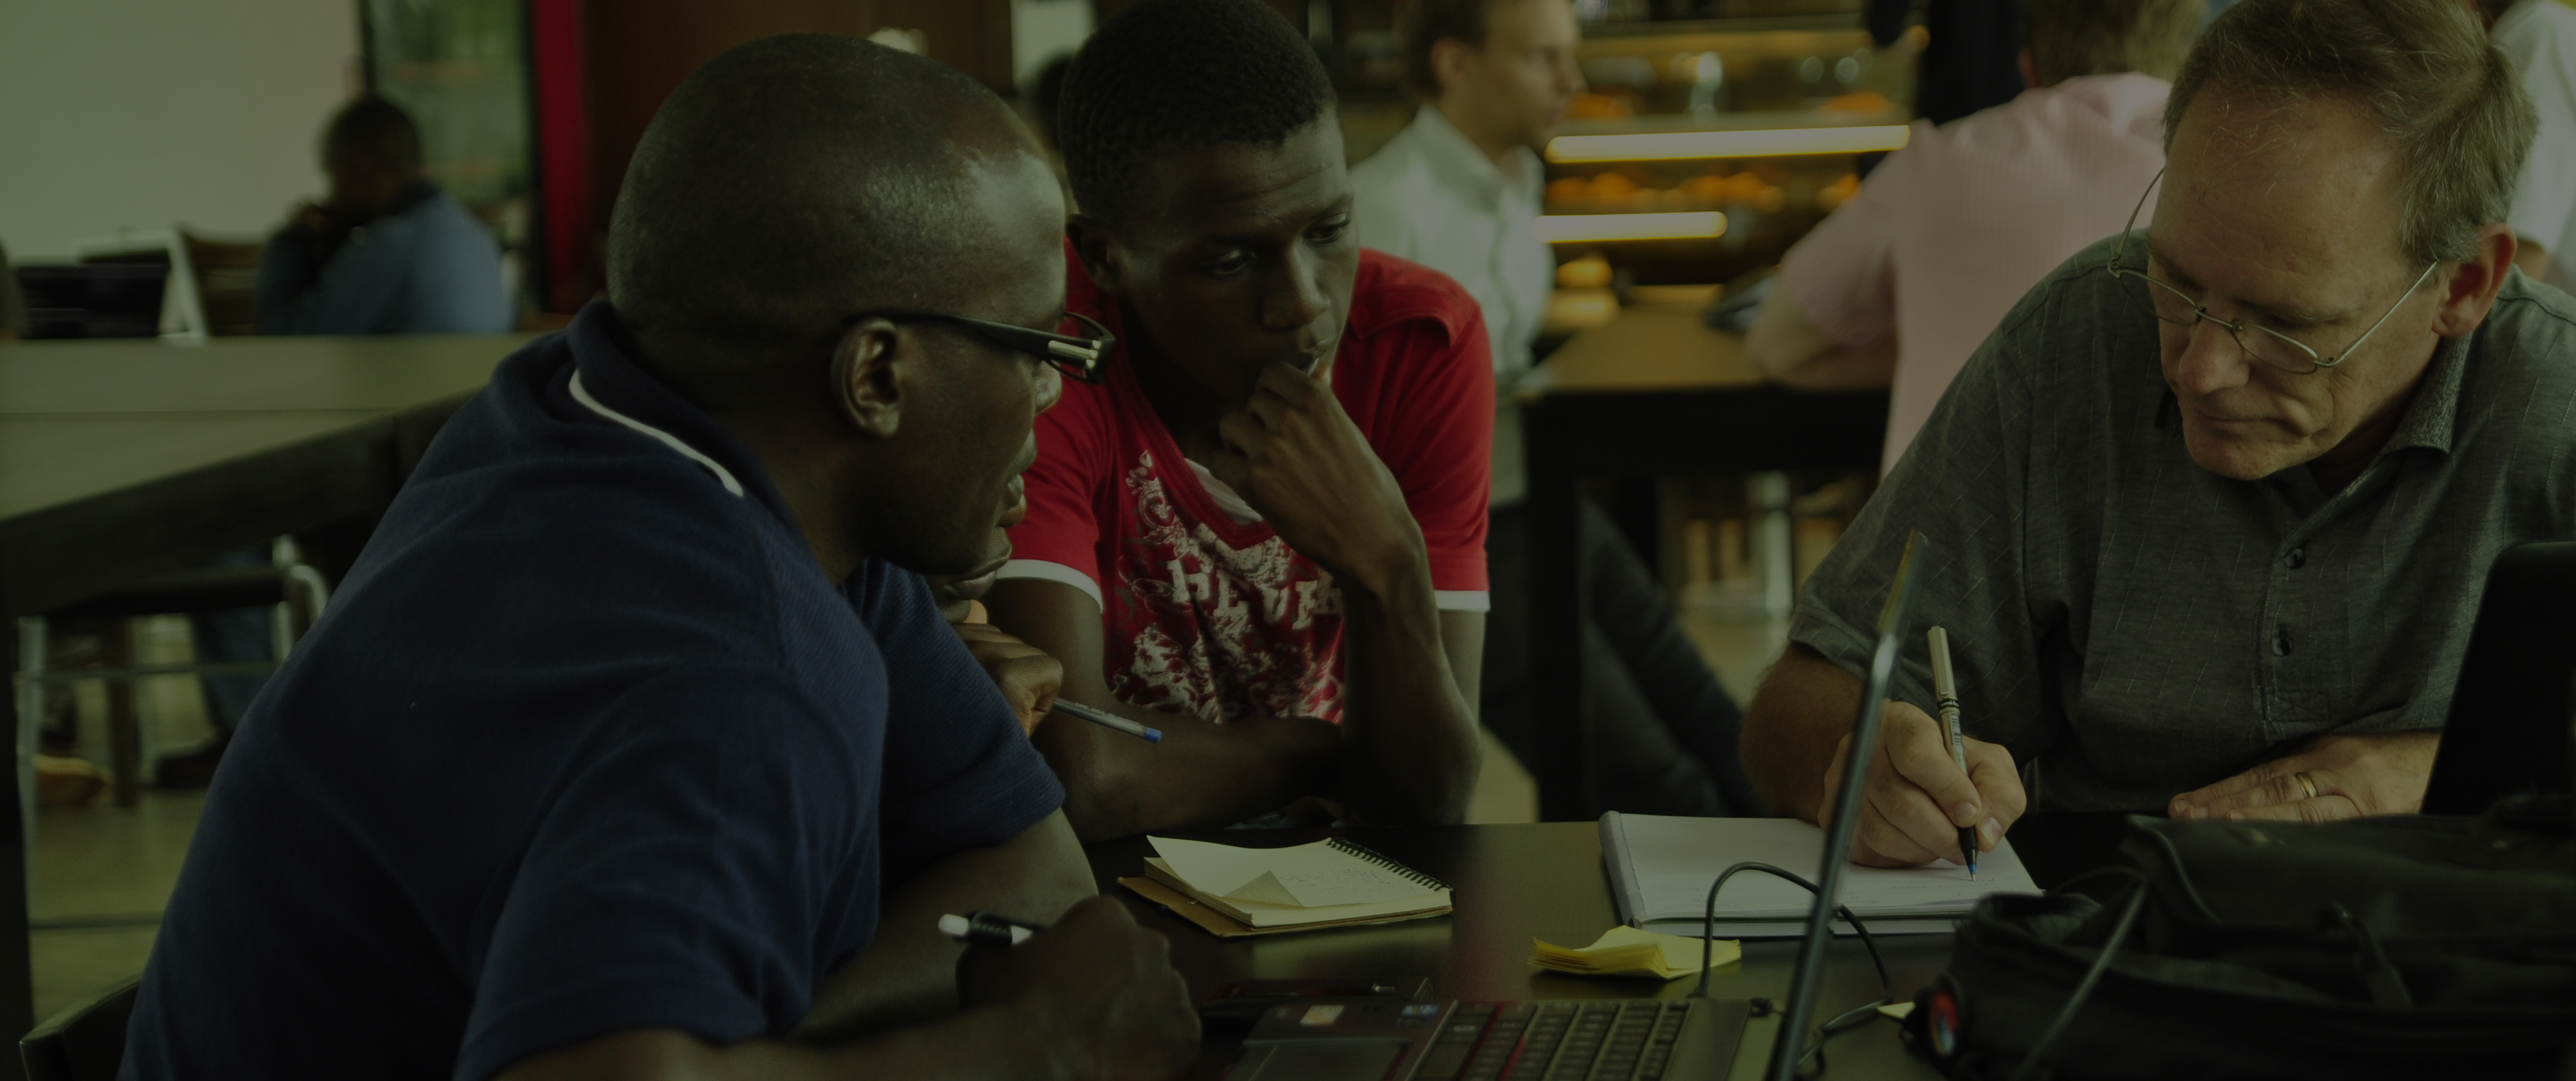 Startup Incubators in Africa and why they don’t work